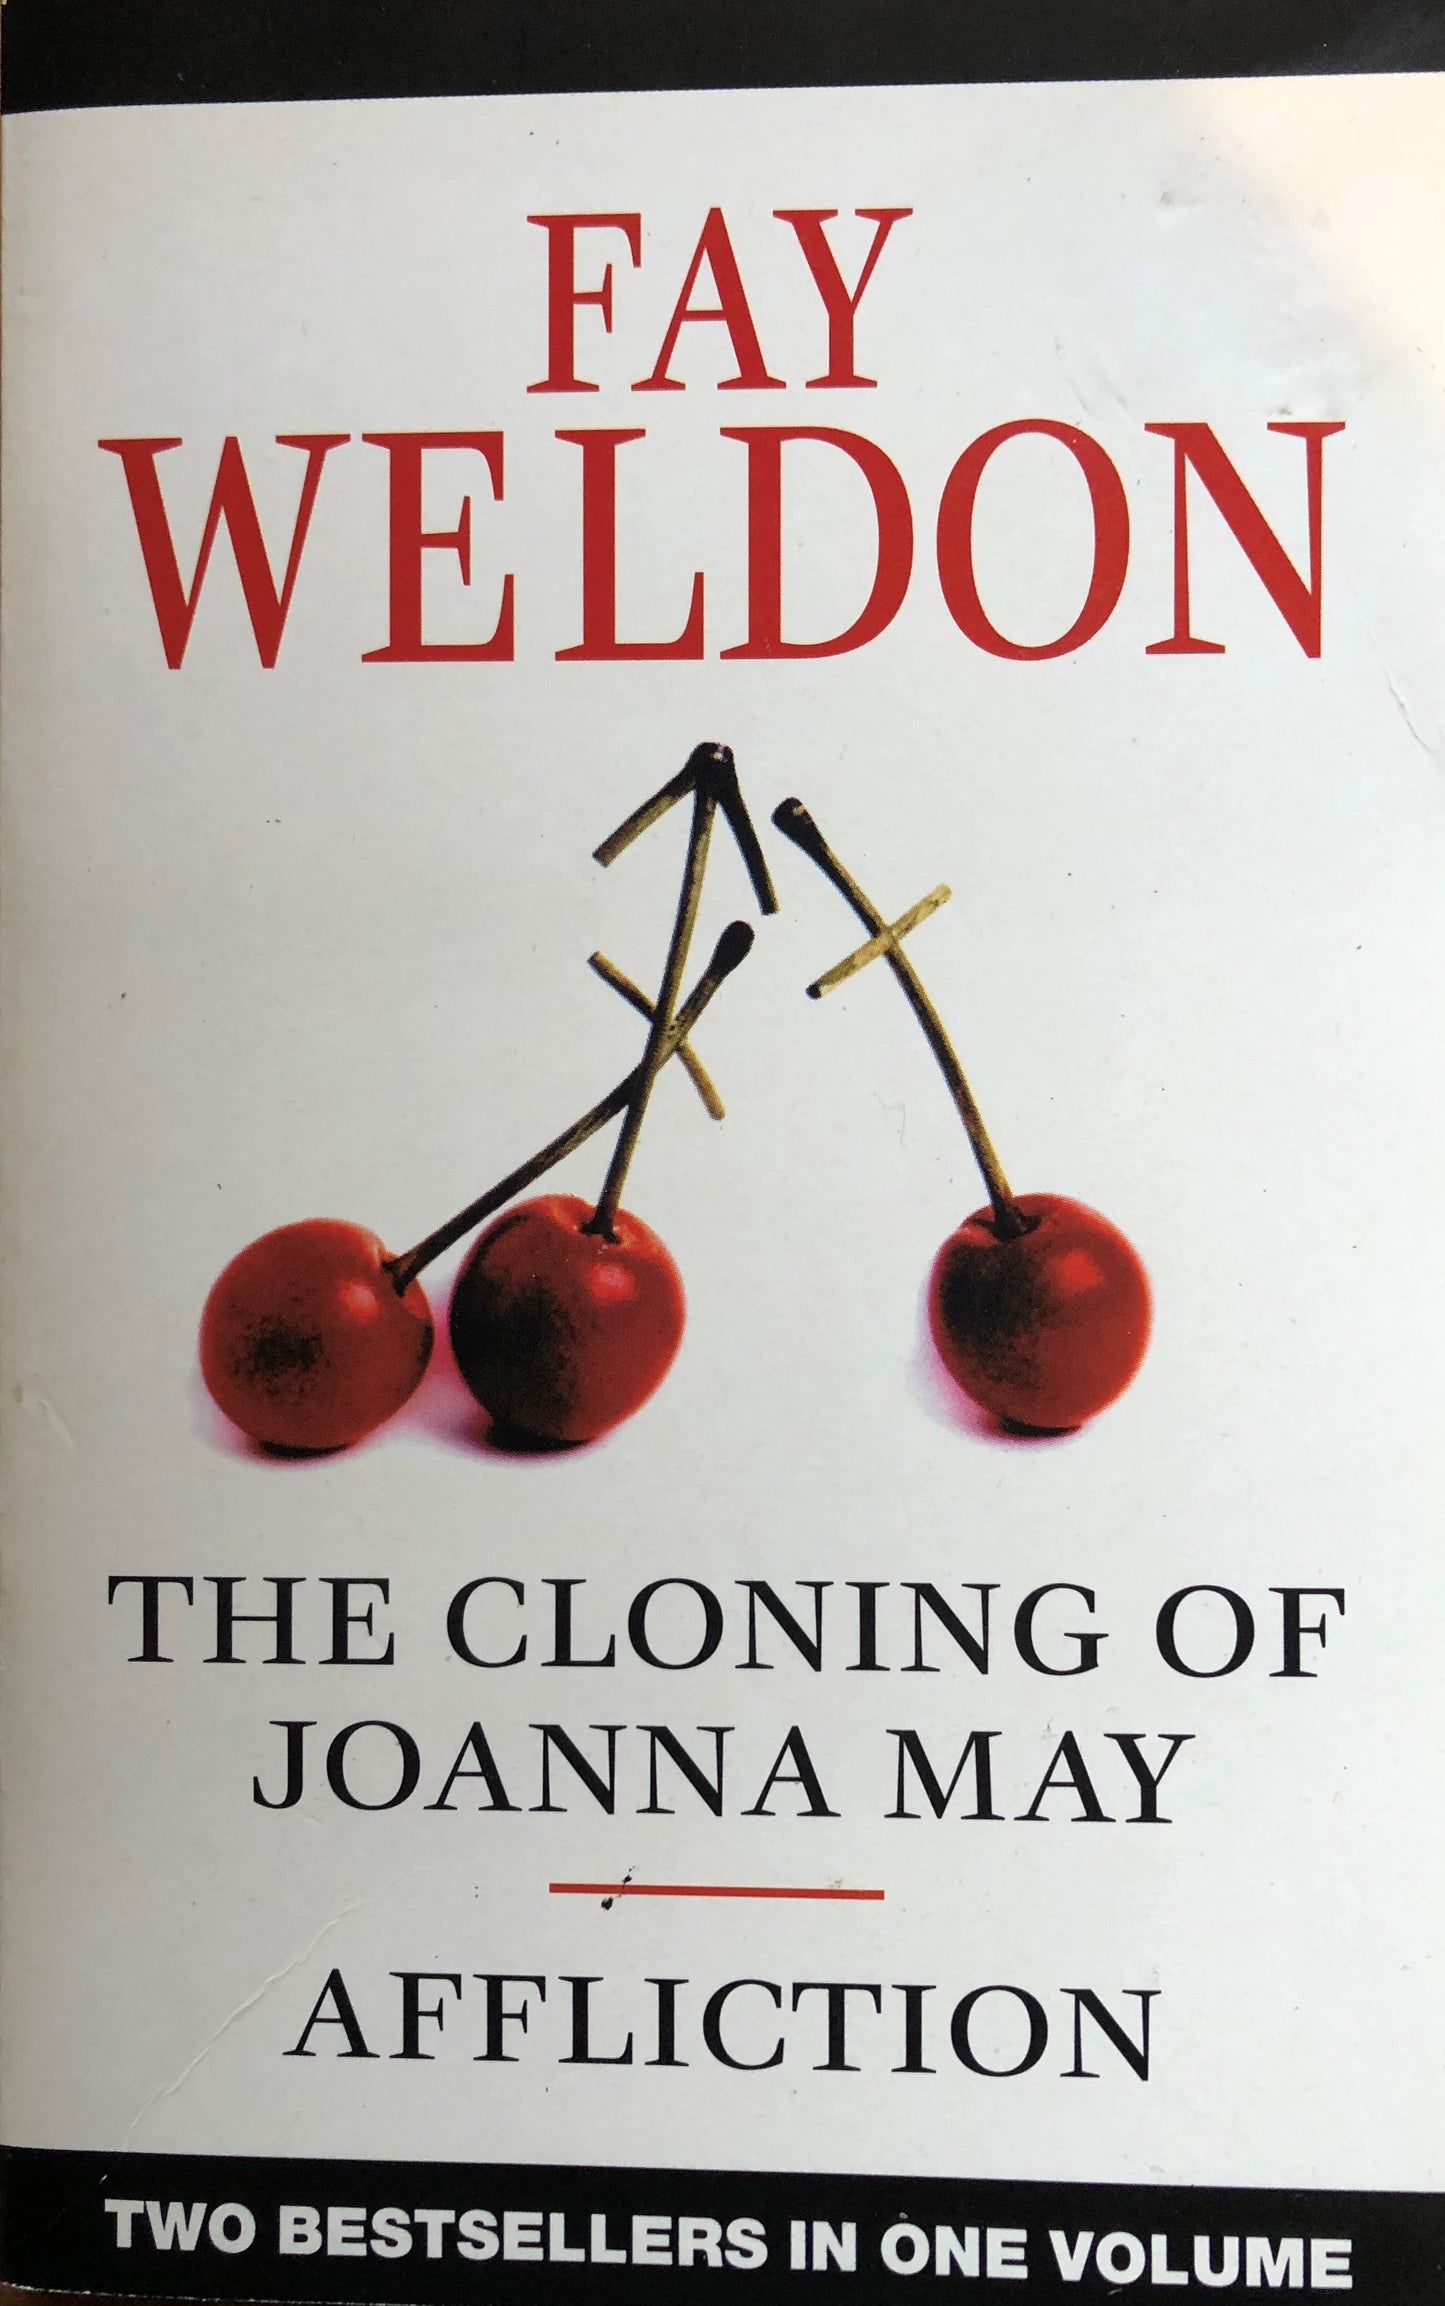 The Cloning of Joanna May / Affliction